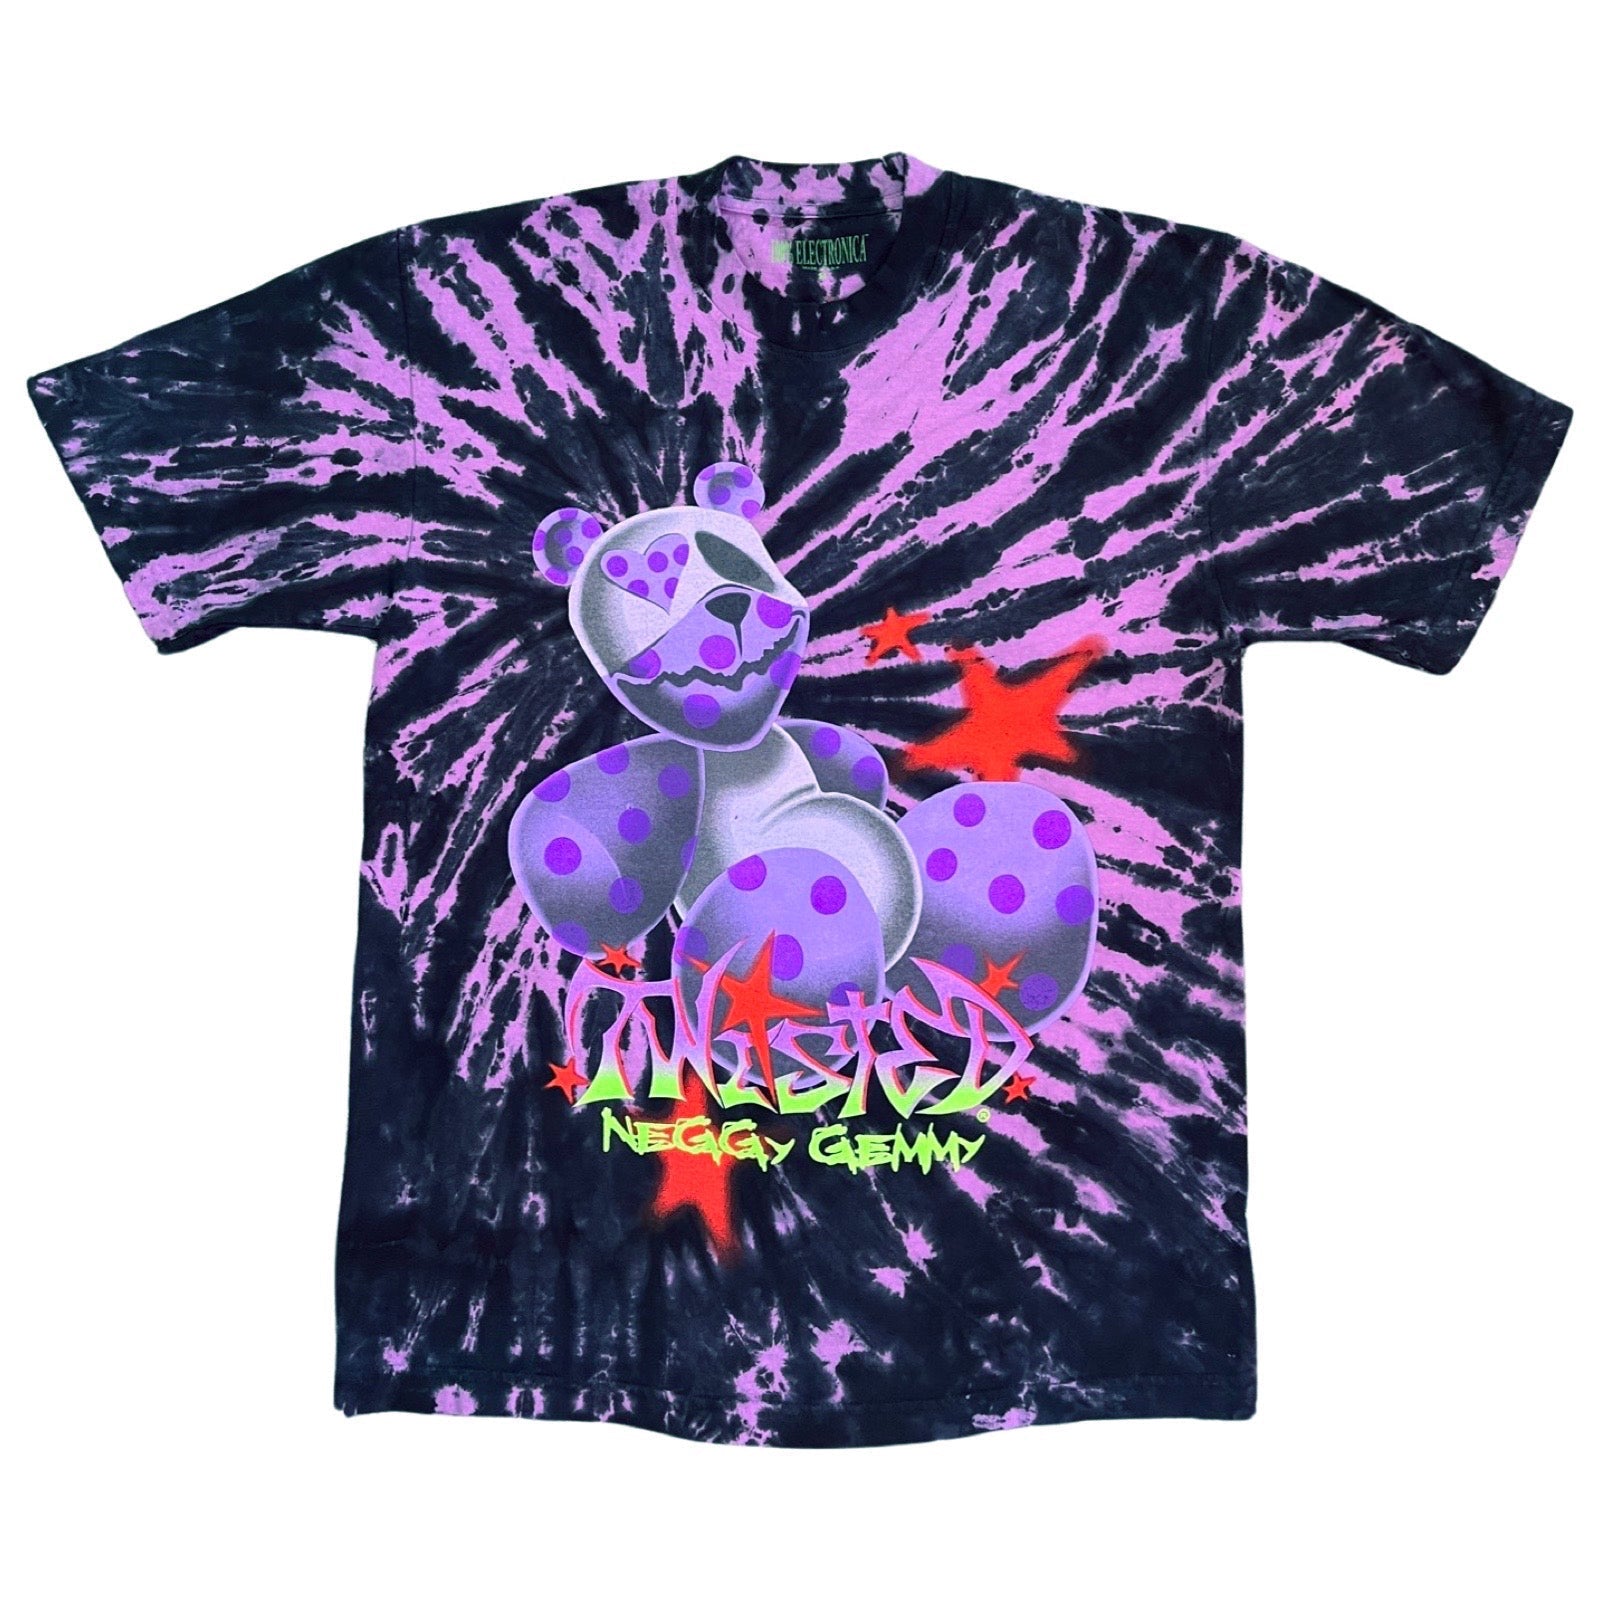 Neggy Gemmy - Twisted Bear T-Shirt - 100% Electronica Official Store (Photo 1)